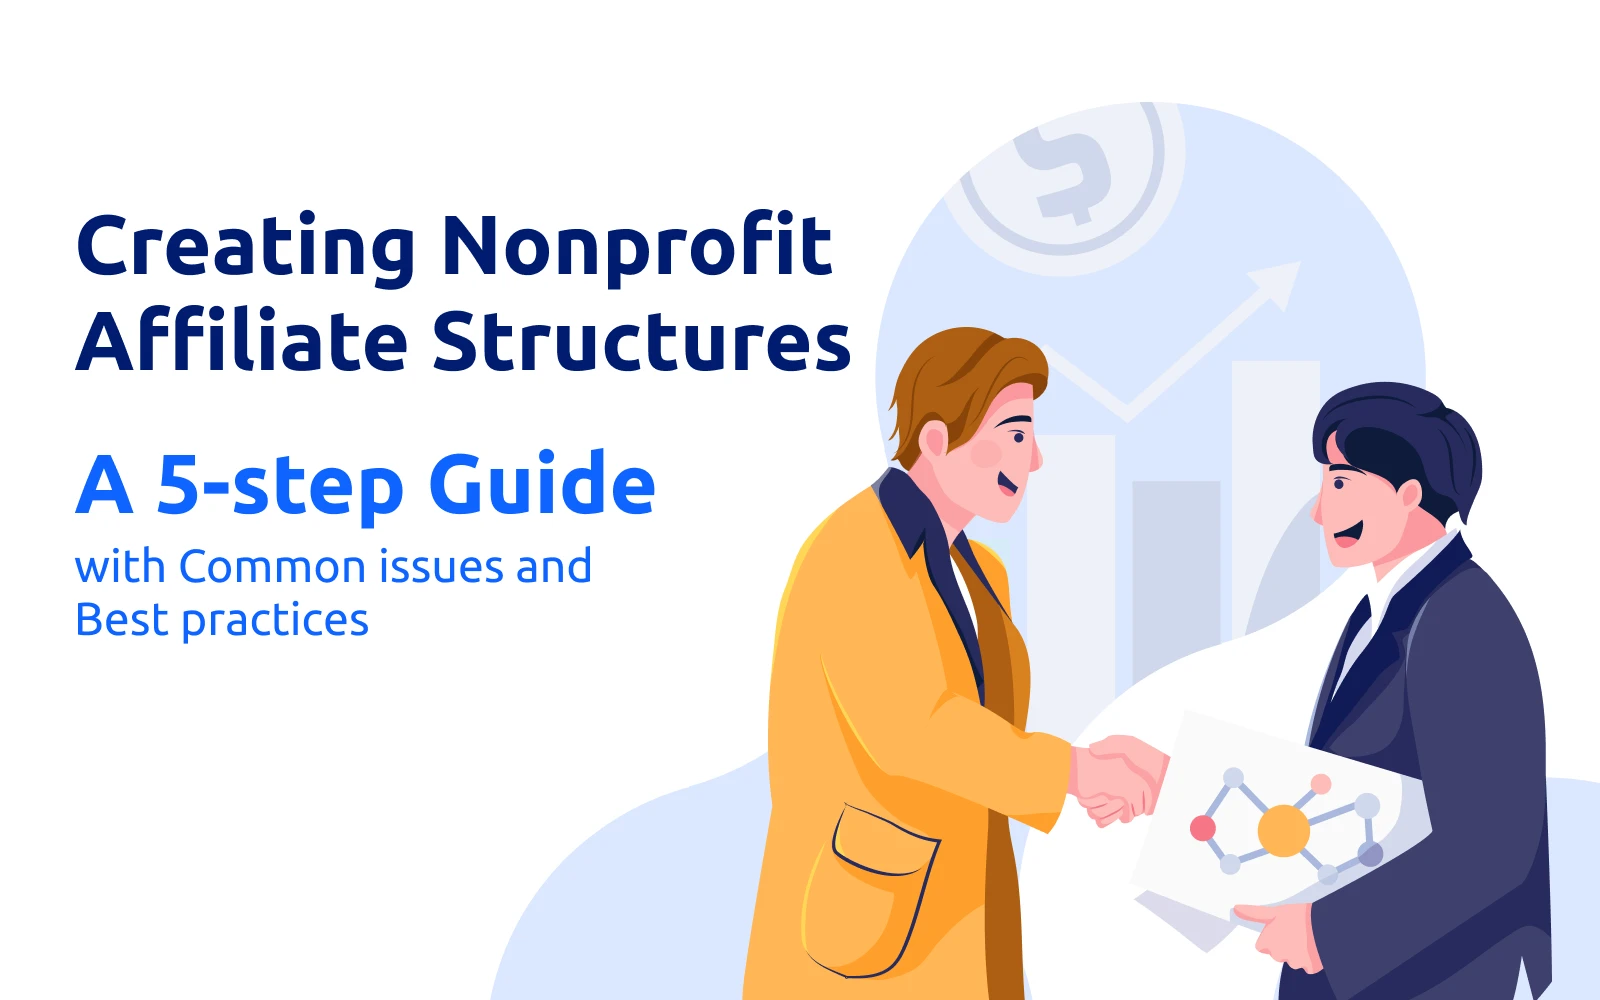 Creating Nonprofit Affiliate Structures - A 5-Step Guide [With Common Issues and Best Practices]